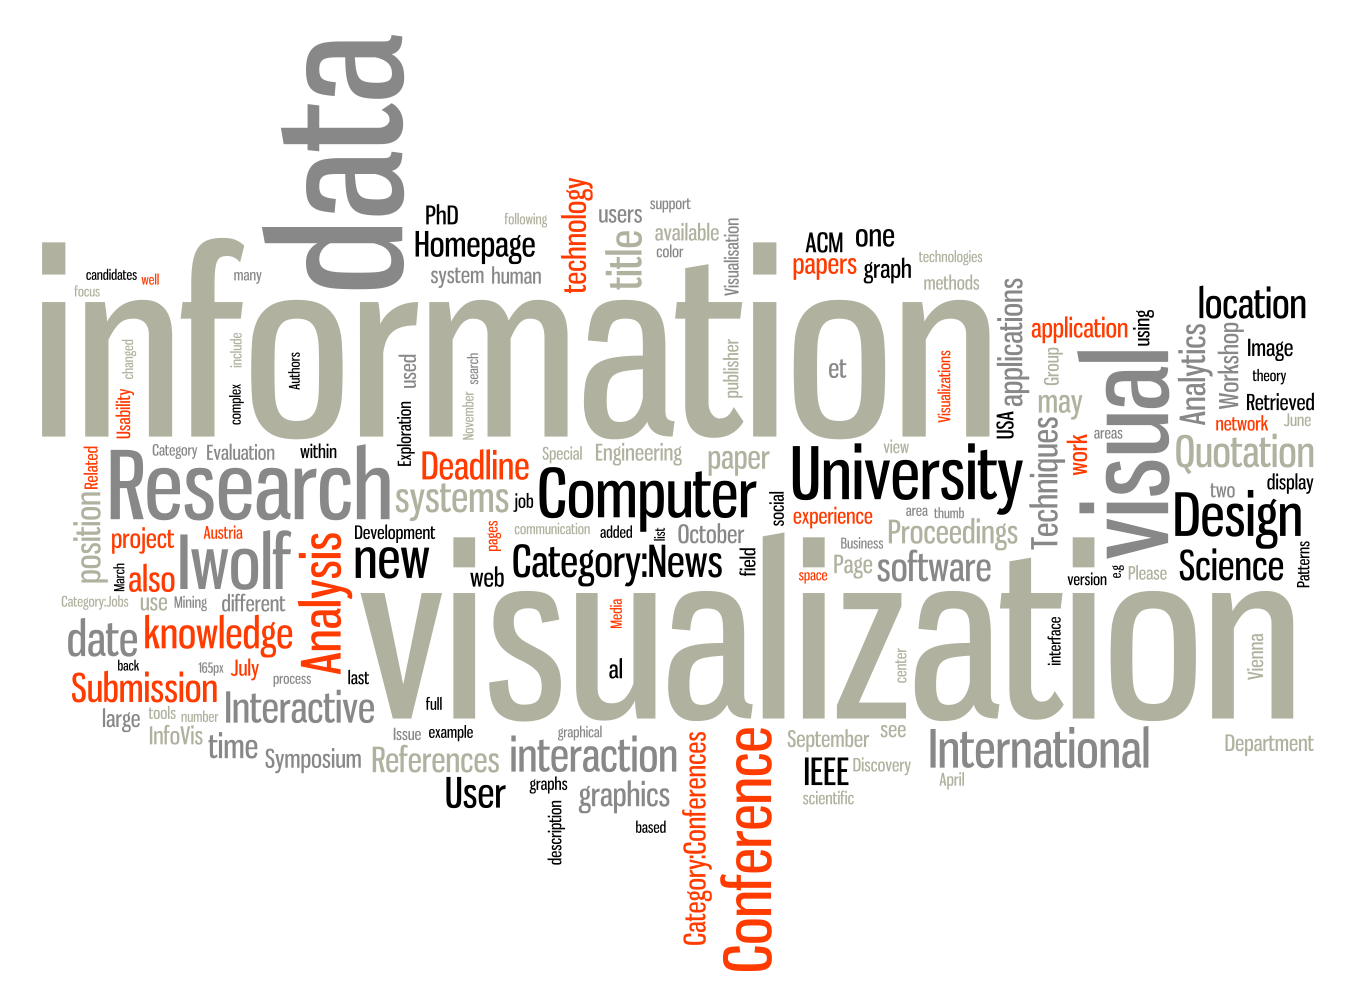 File:Infovis-wiki tagcloud 20090827.png